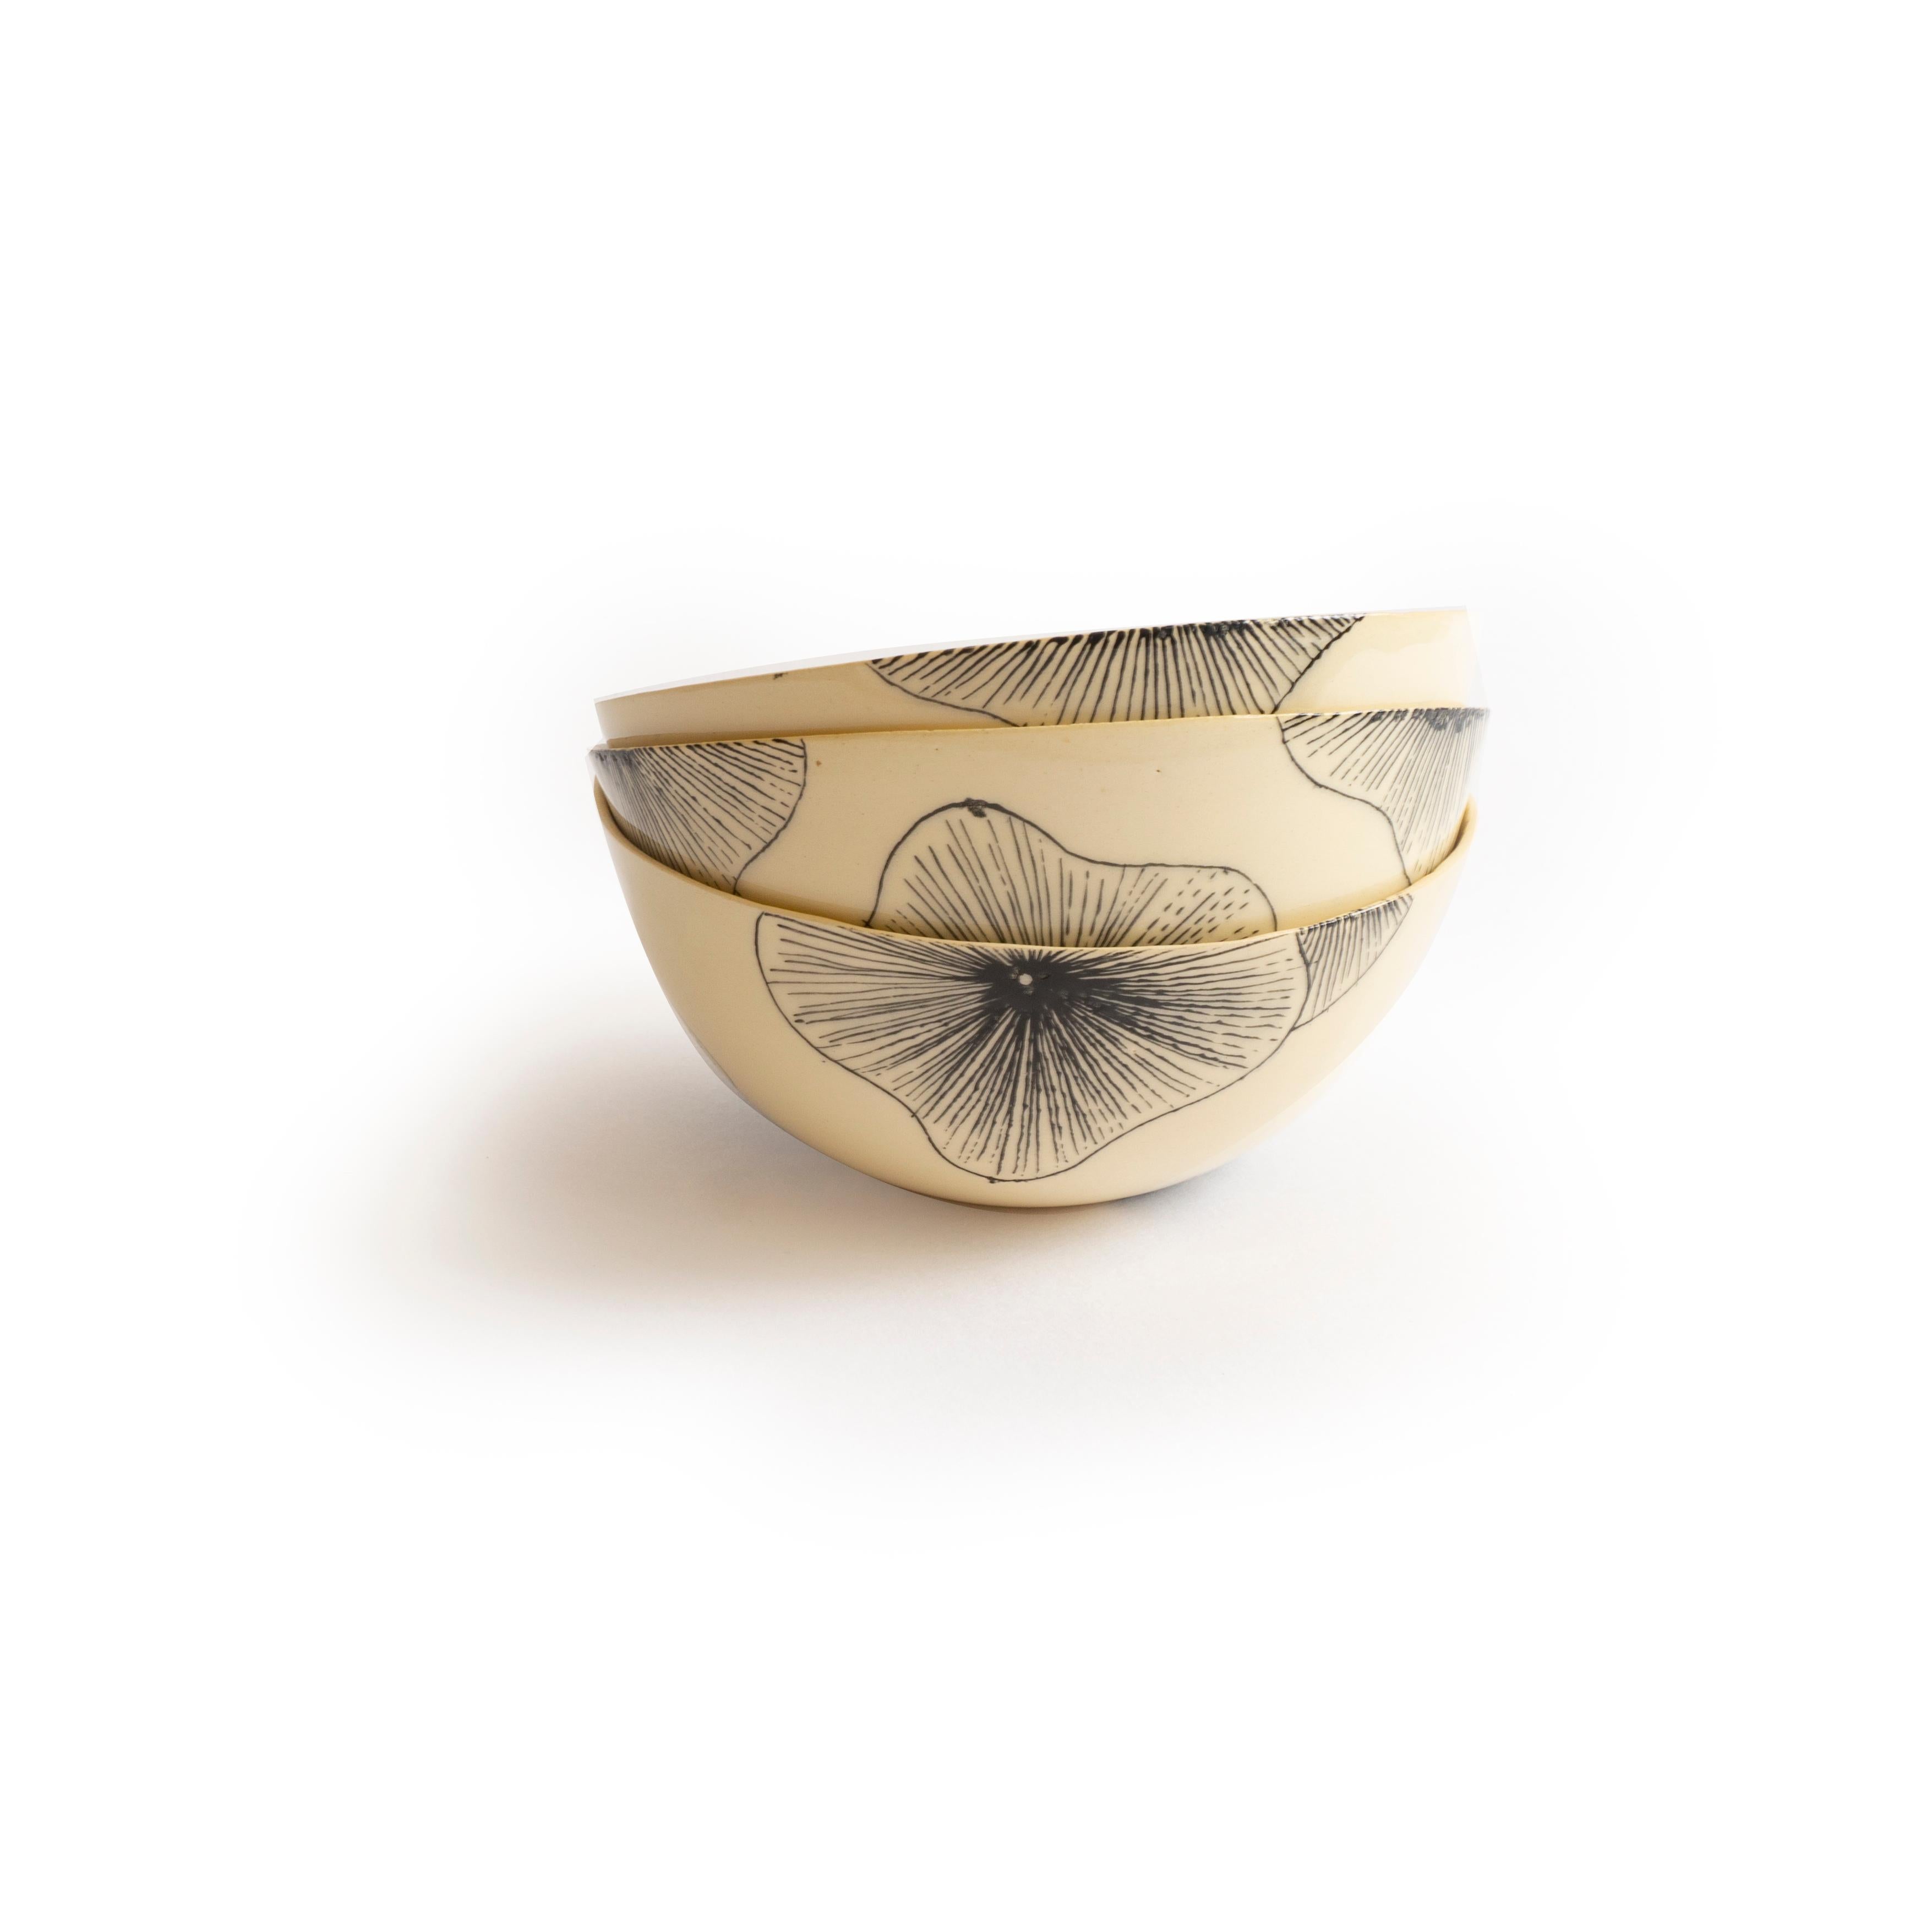 These handcrafted ceramic bowls from Paris are completely hand made. From the hand beating of the clay to the drawn illustration each plate is meticulously crafted. These bowls are made from natural clay resulting in slightly different hues from one